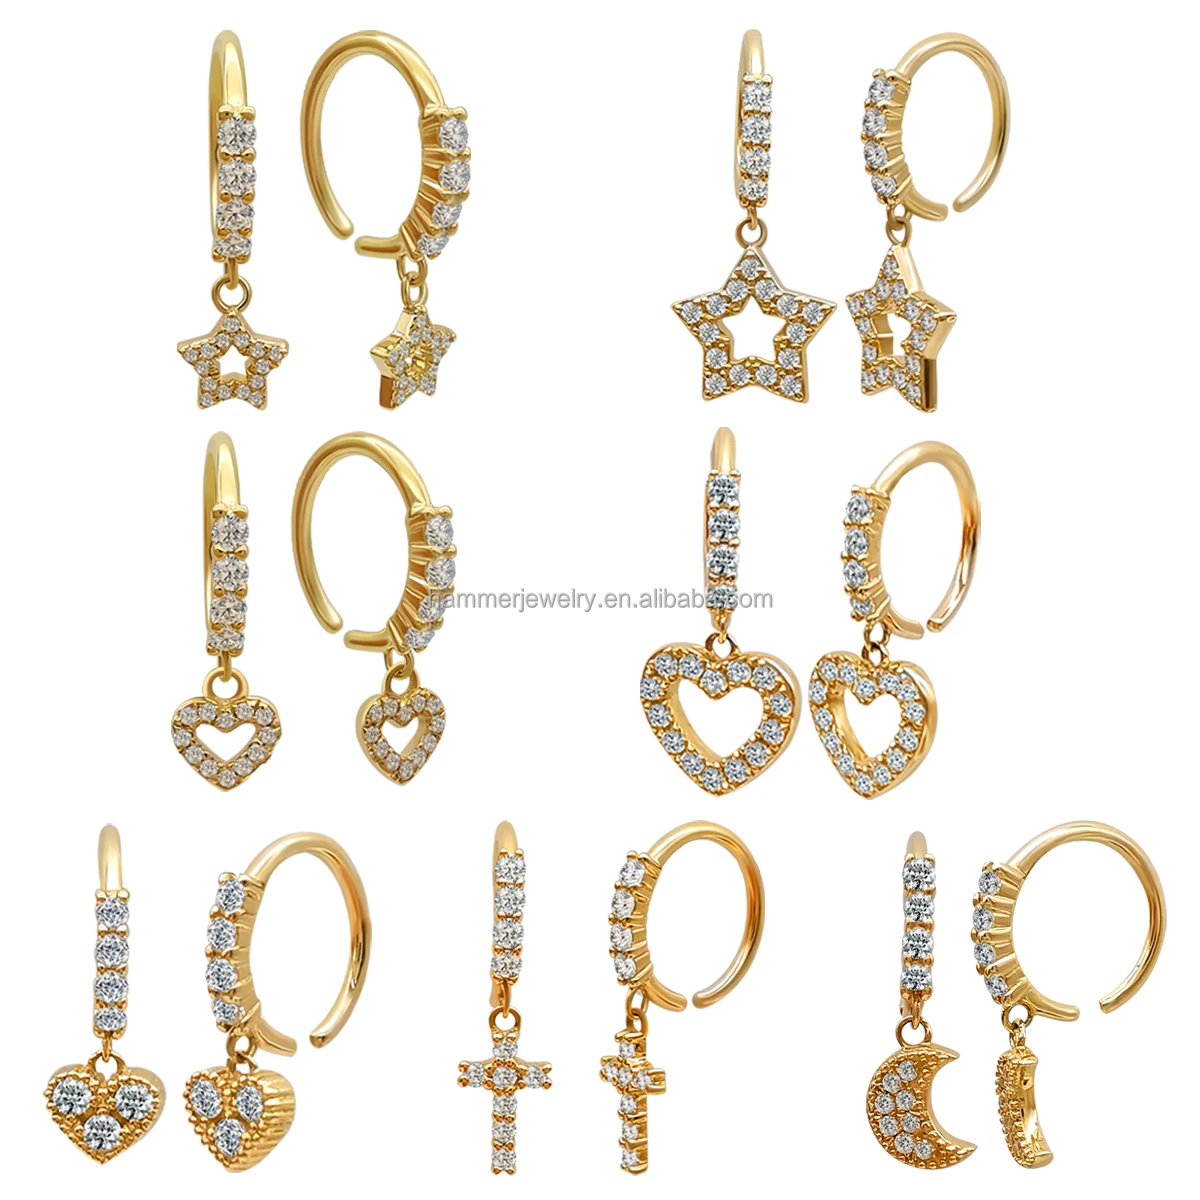 

AU585 Real Gold With Zircon Nose Ring Piercing Jewelry Real Gold Hypoallergenic Clip On Nose Rings